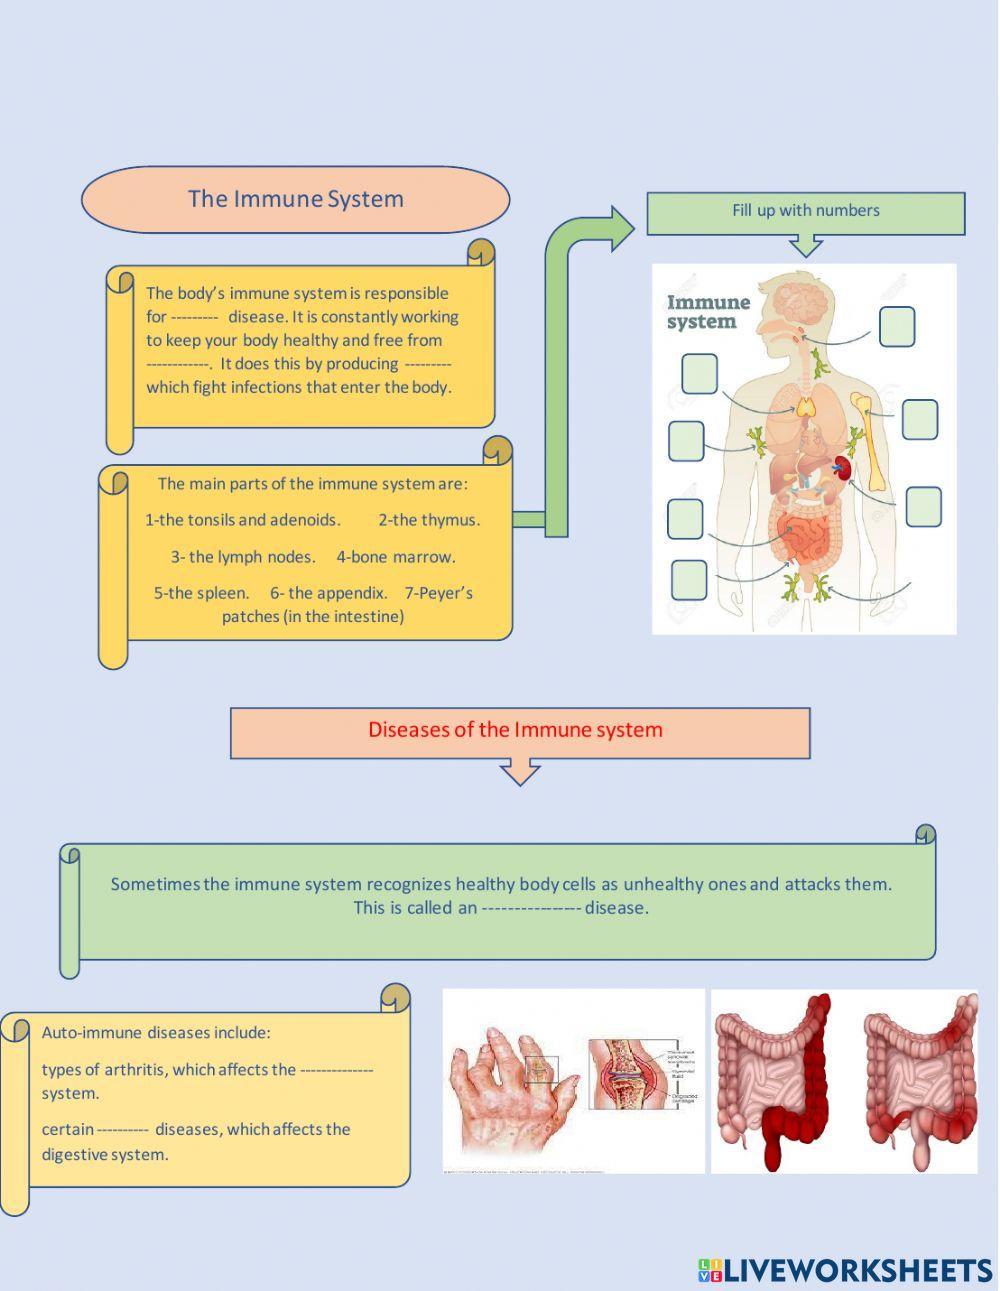 Diseases of the immune system